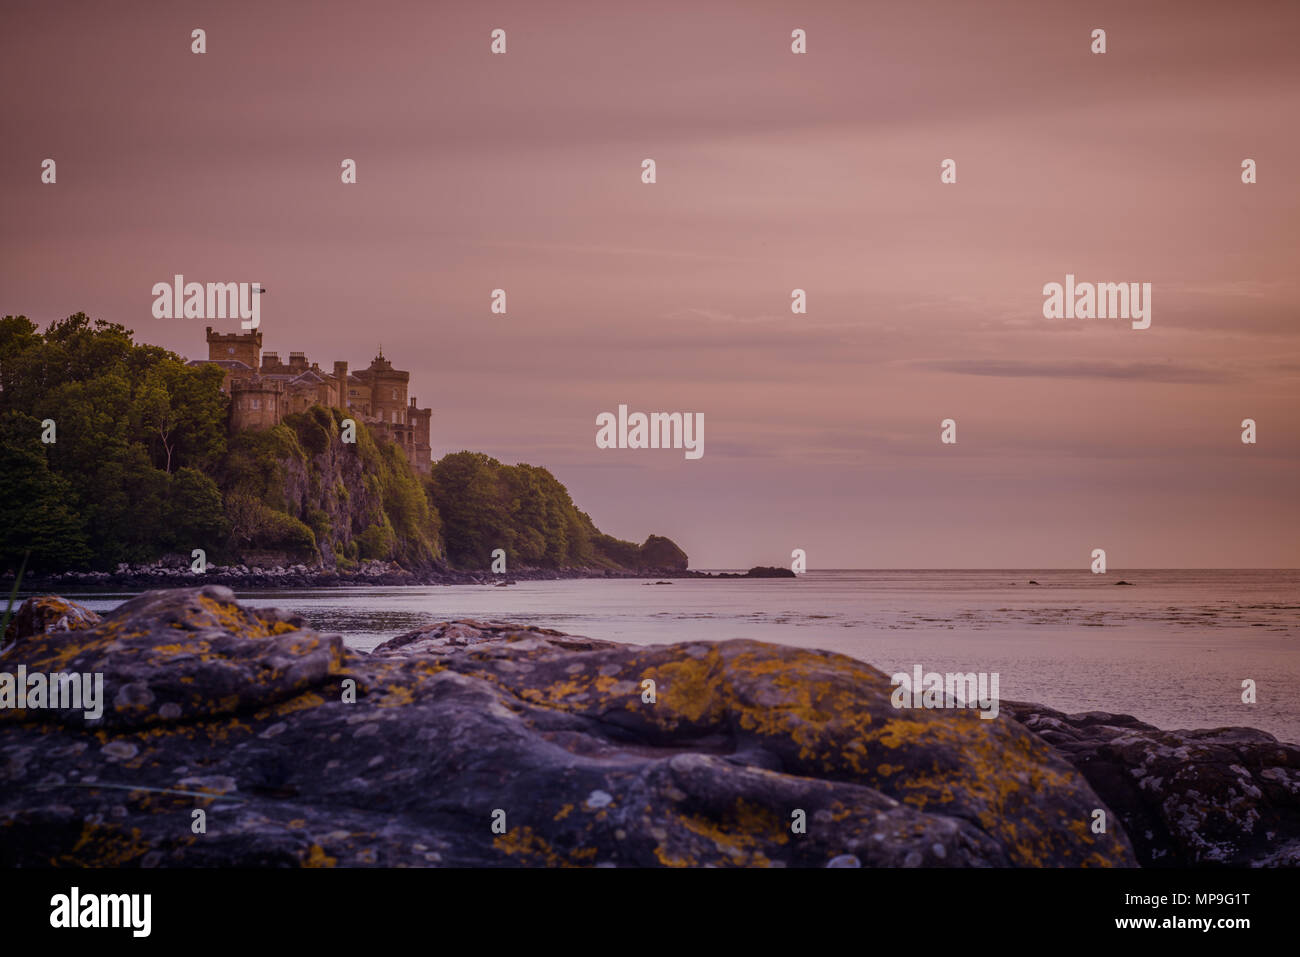 View of Culzean Castle on the West Coast of Scotland at Sunset from the Beach Stock Photo